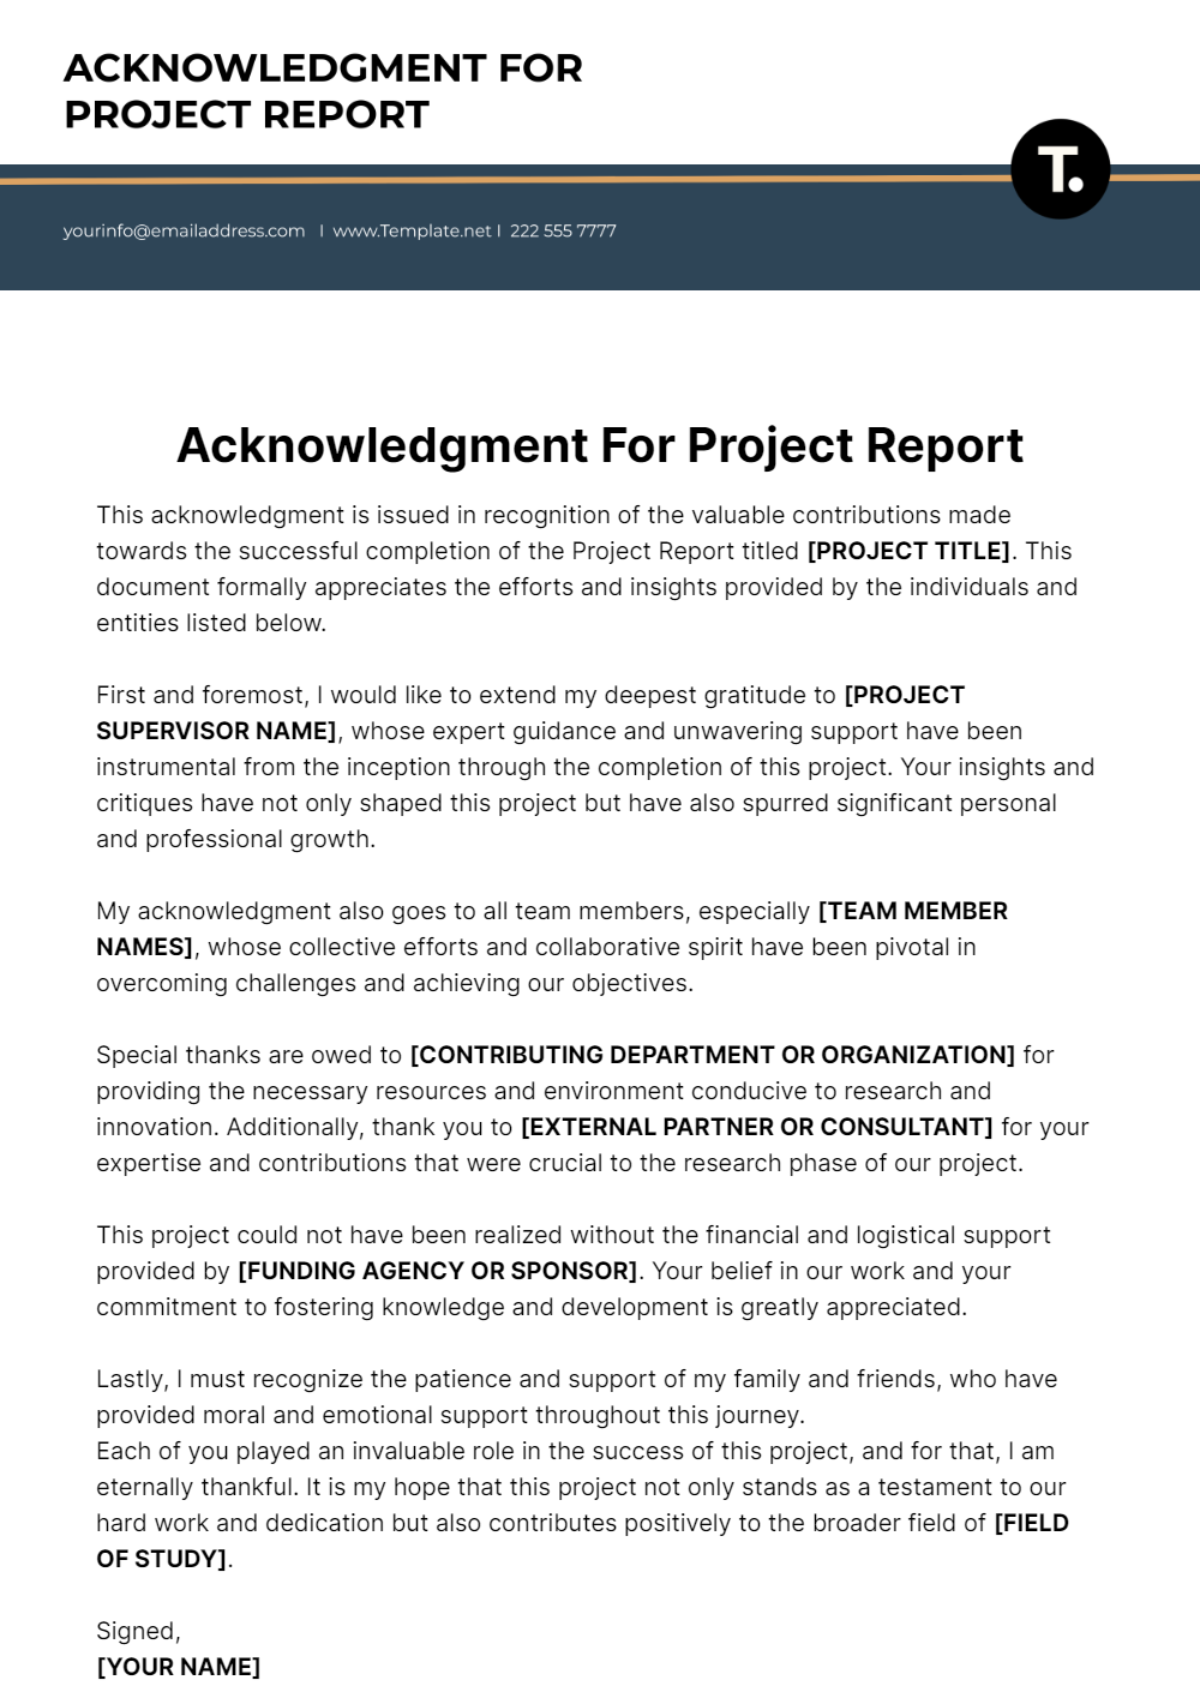 Acknowledgment For Project Report Template